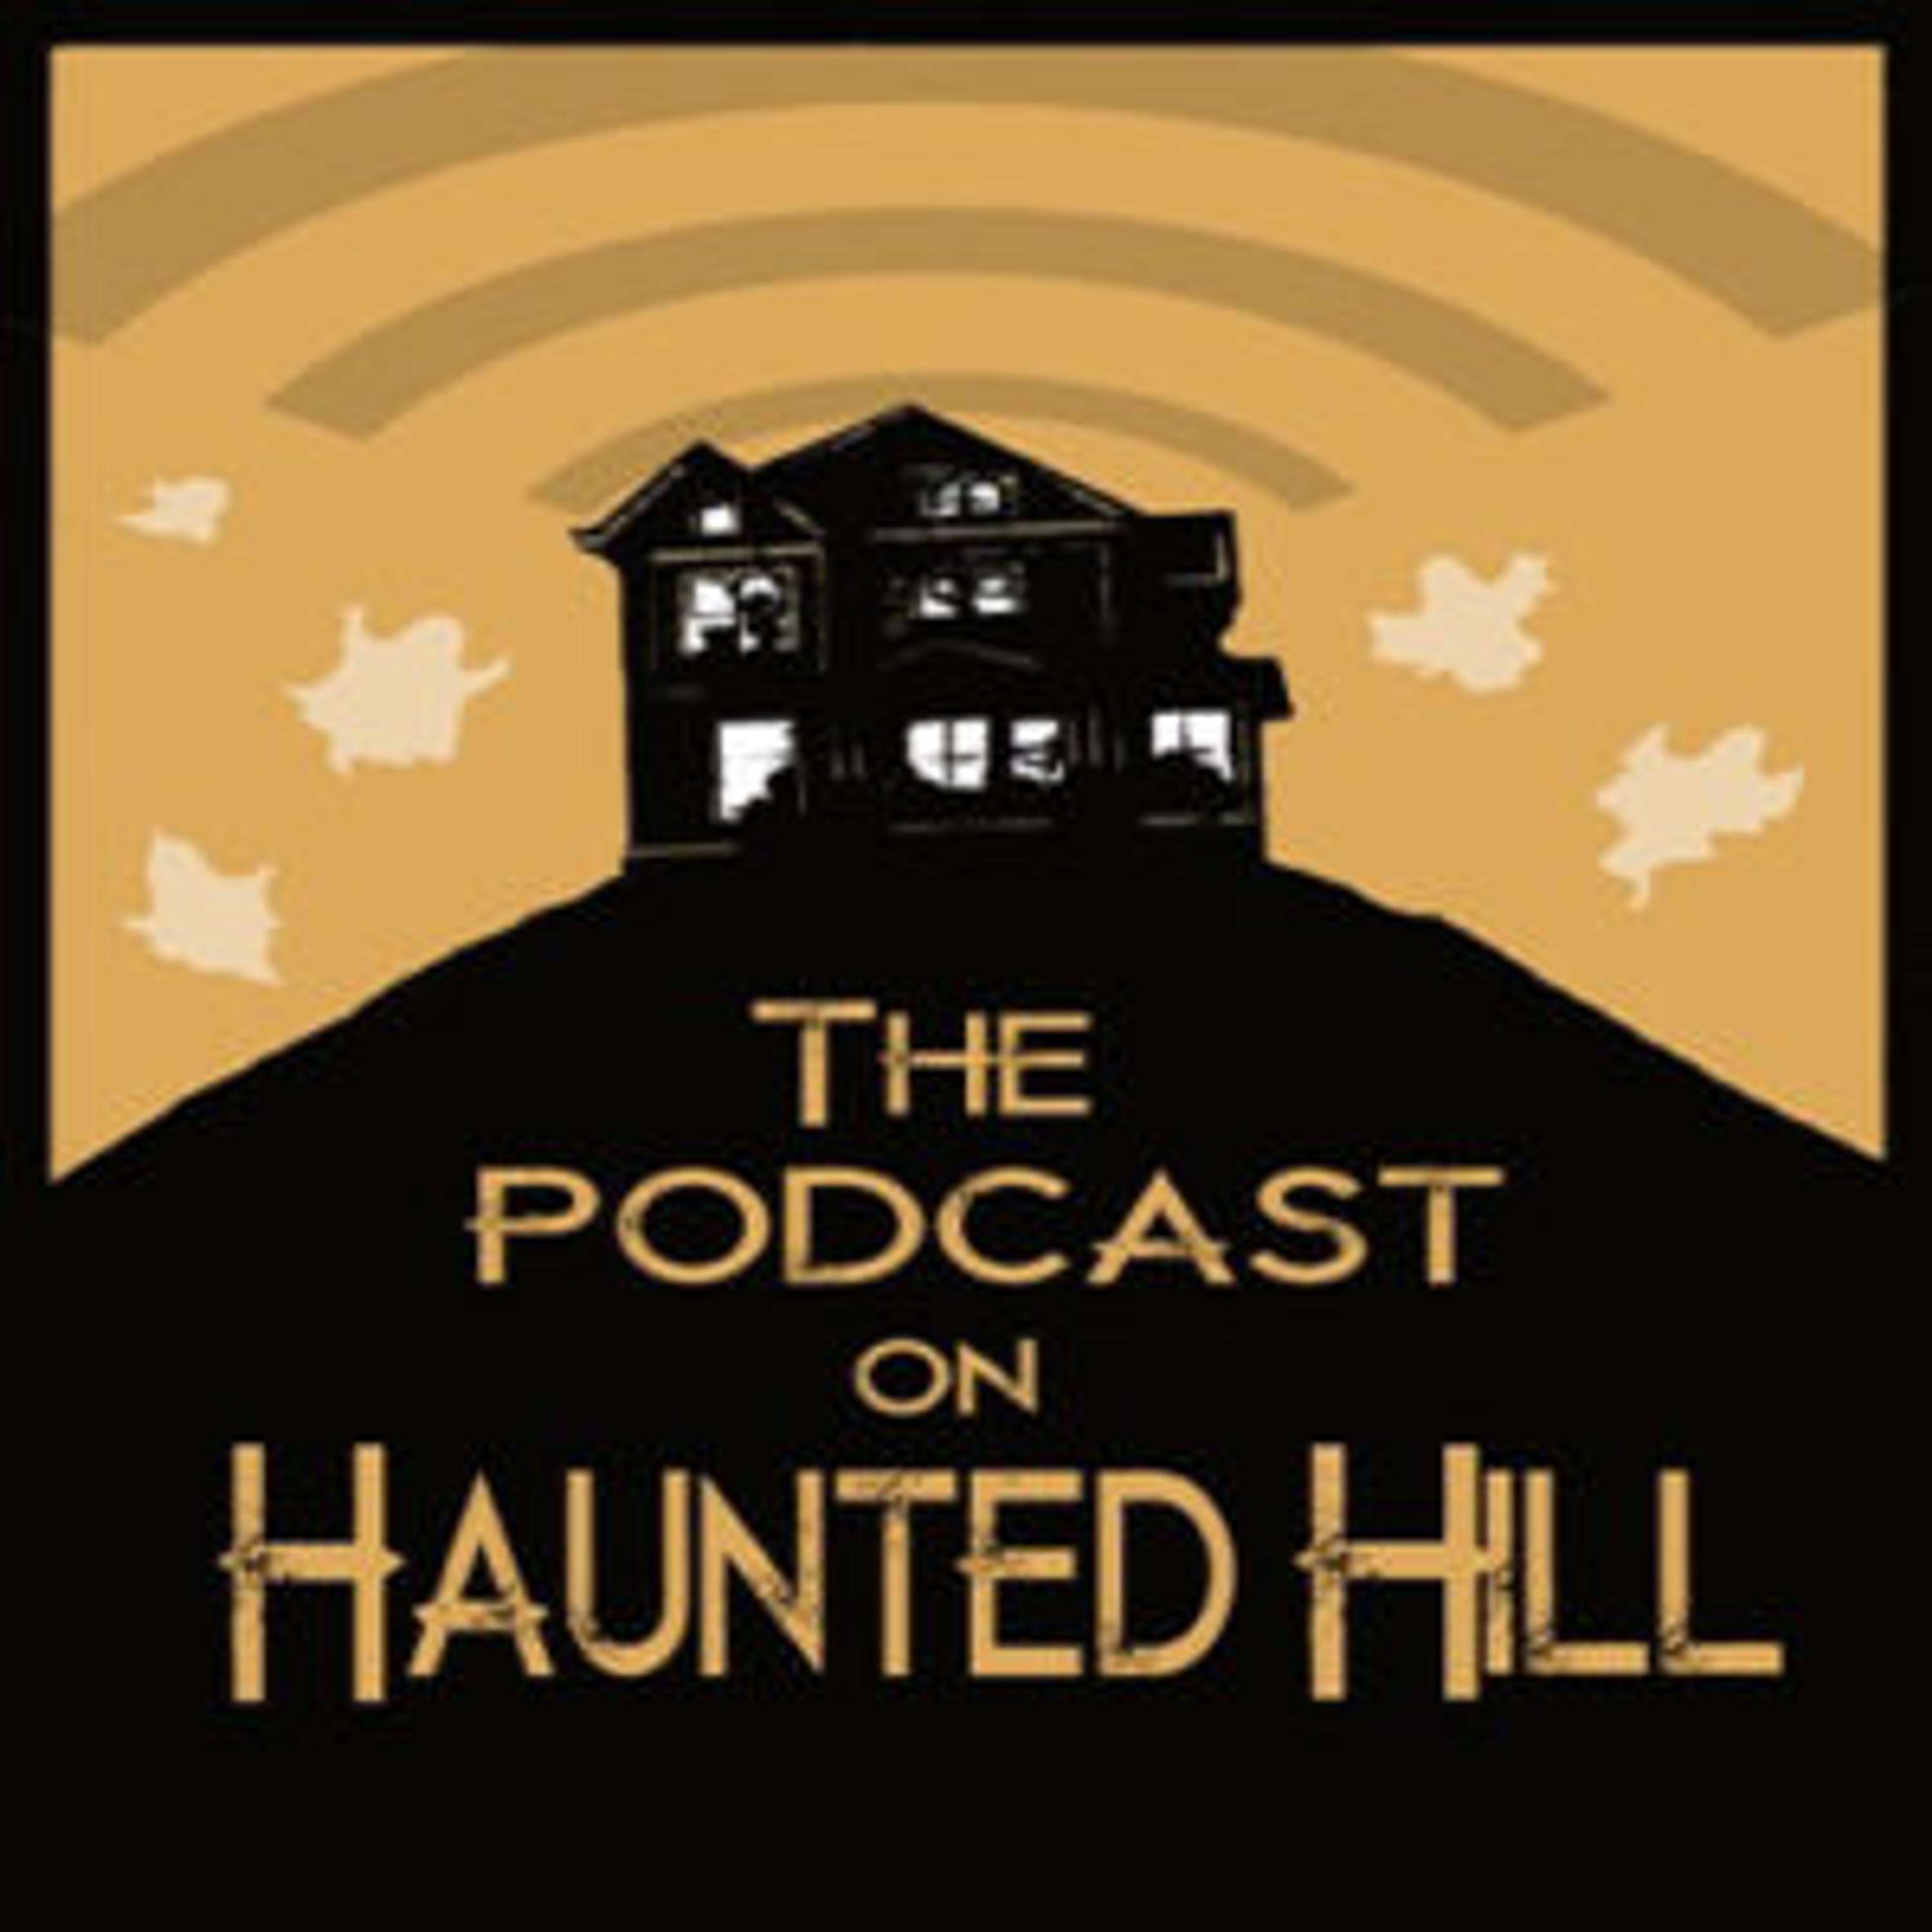 THE PODCAST ON HAUNTED HILL EPISODE 61 – SEVERANCE AND TRIANGLE